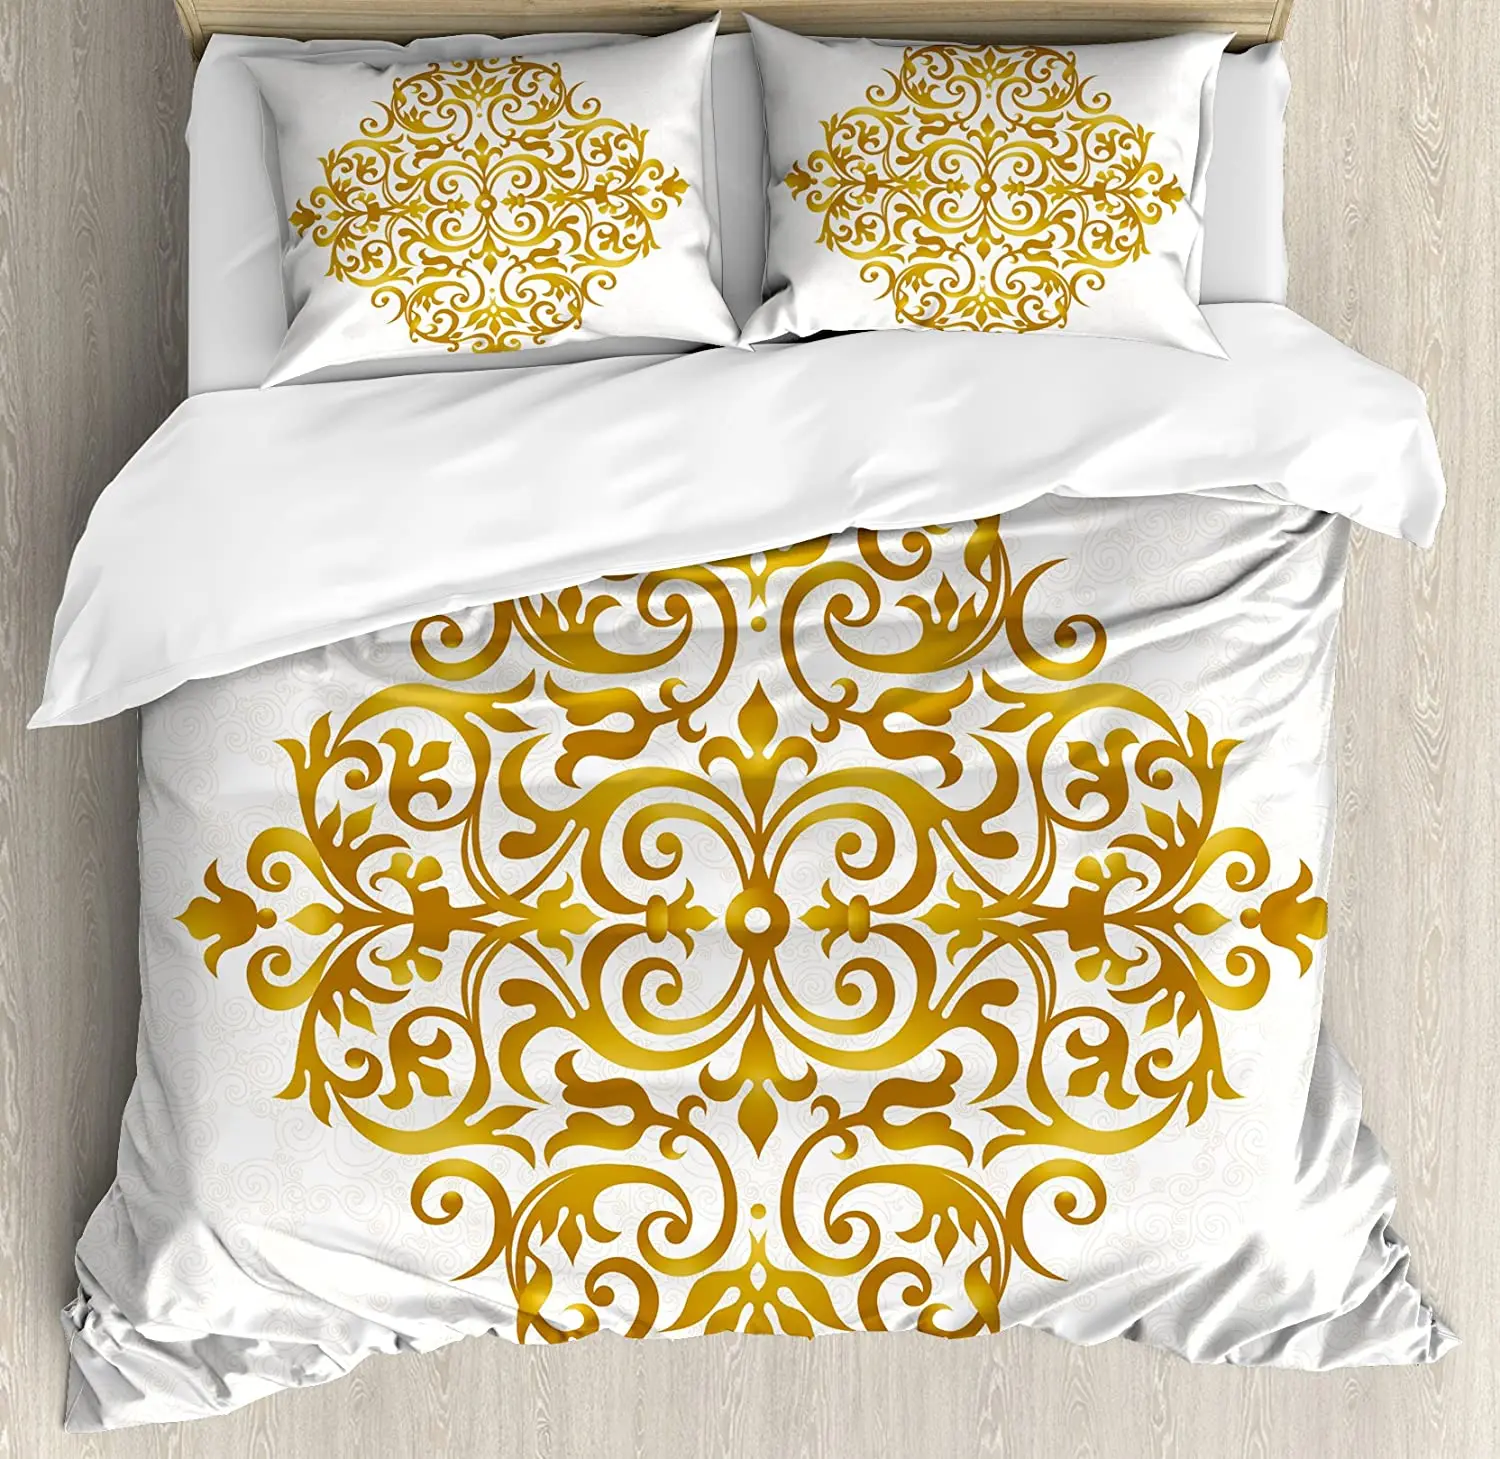 

Mandala Duvet Cover Set Victorian Style Traditional Filigree Inspired Royal Oriental Classic Print Bedding Set for Home